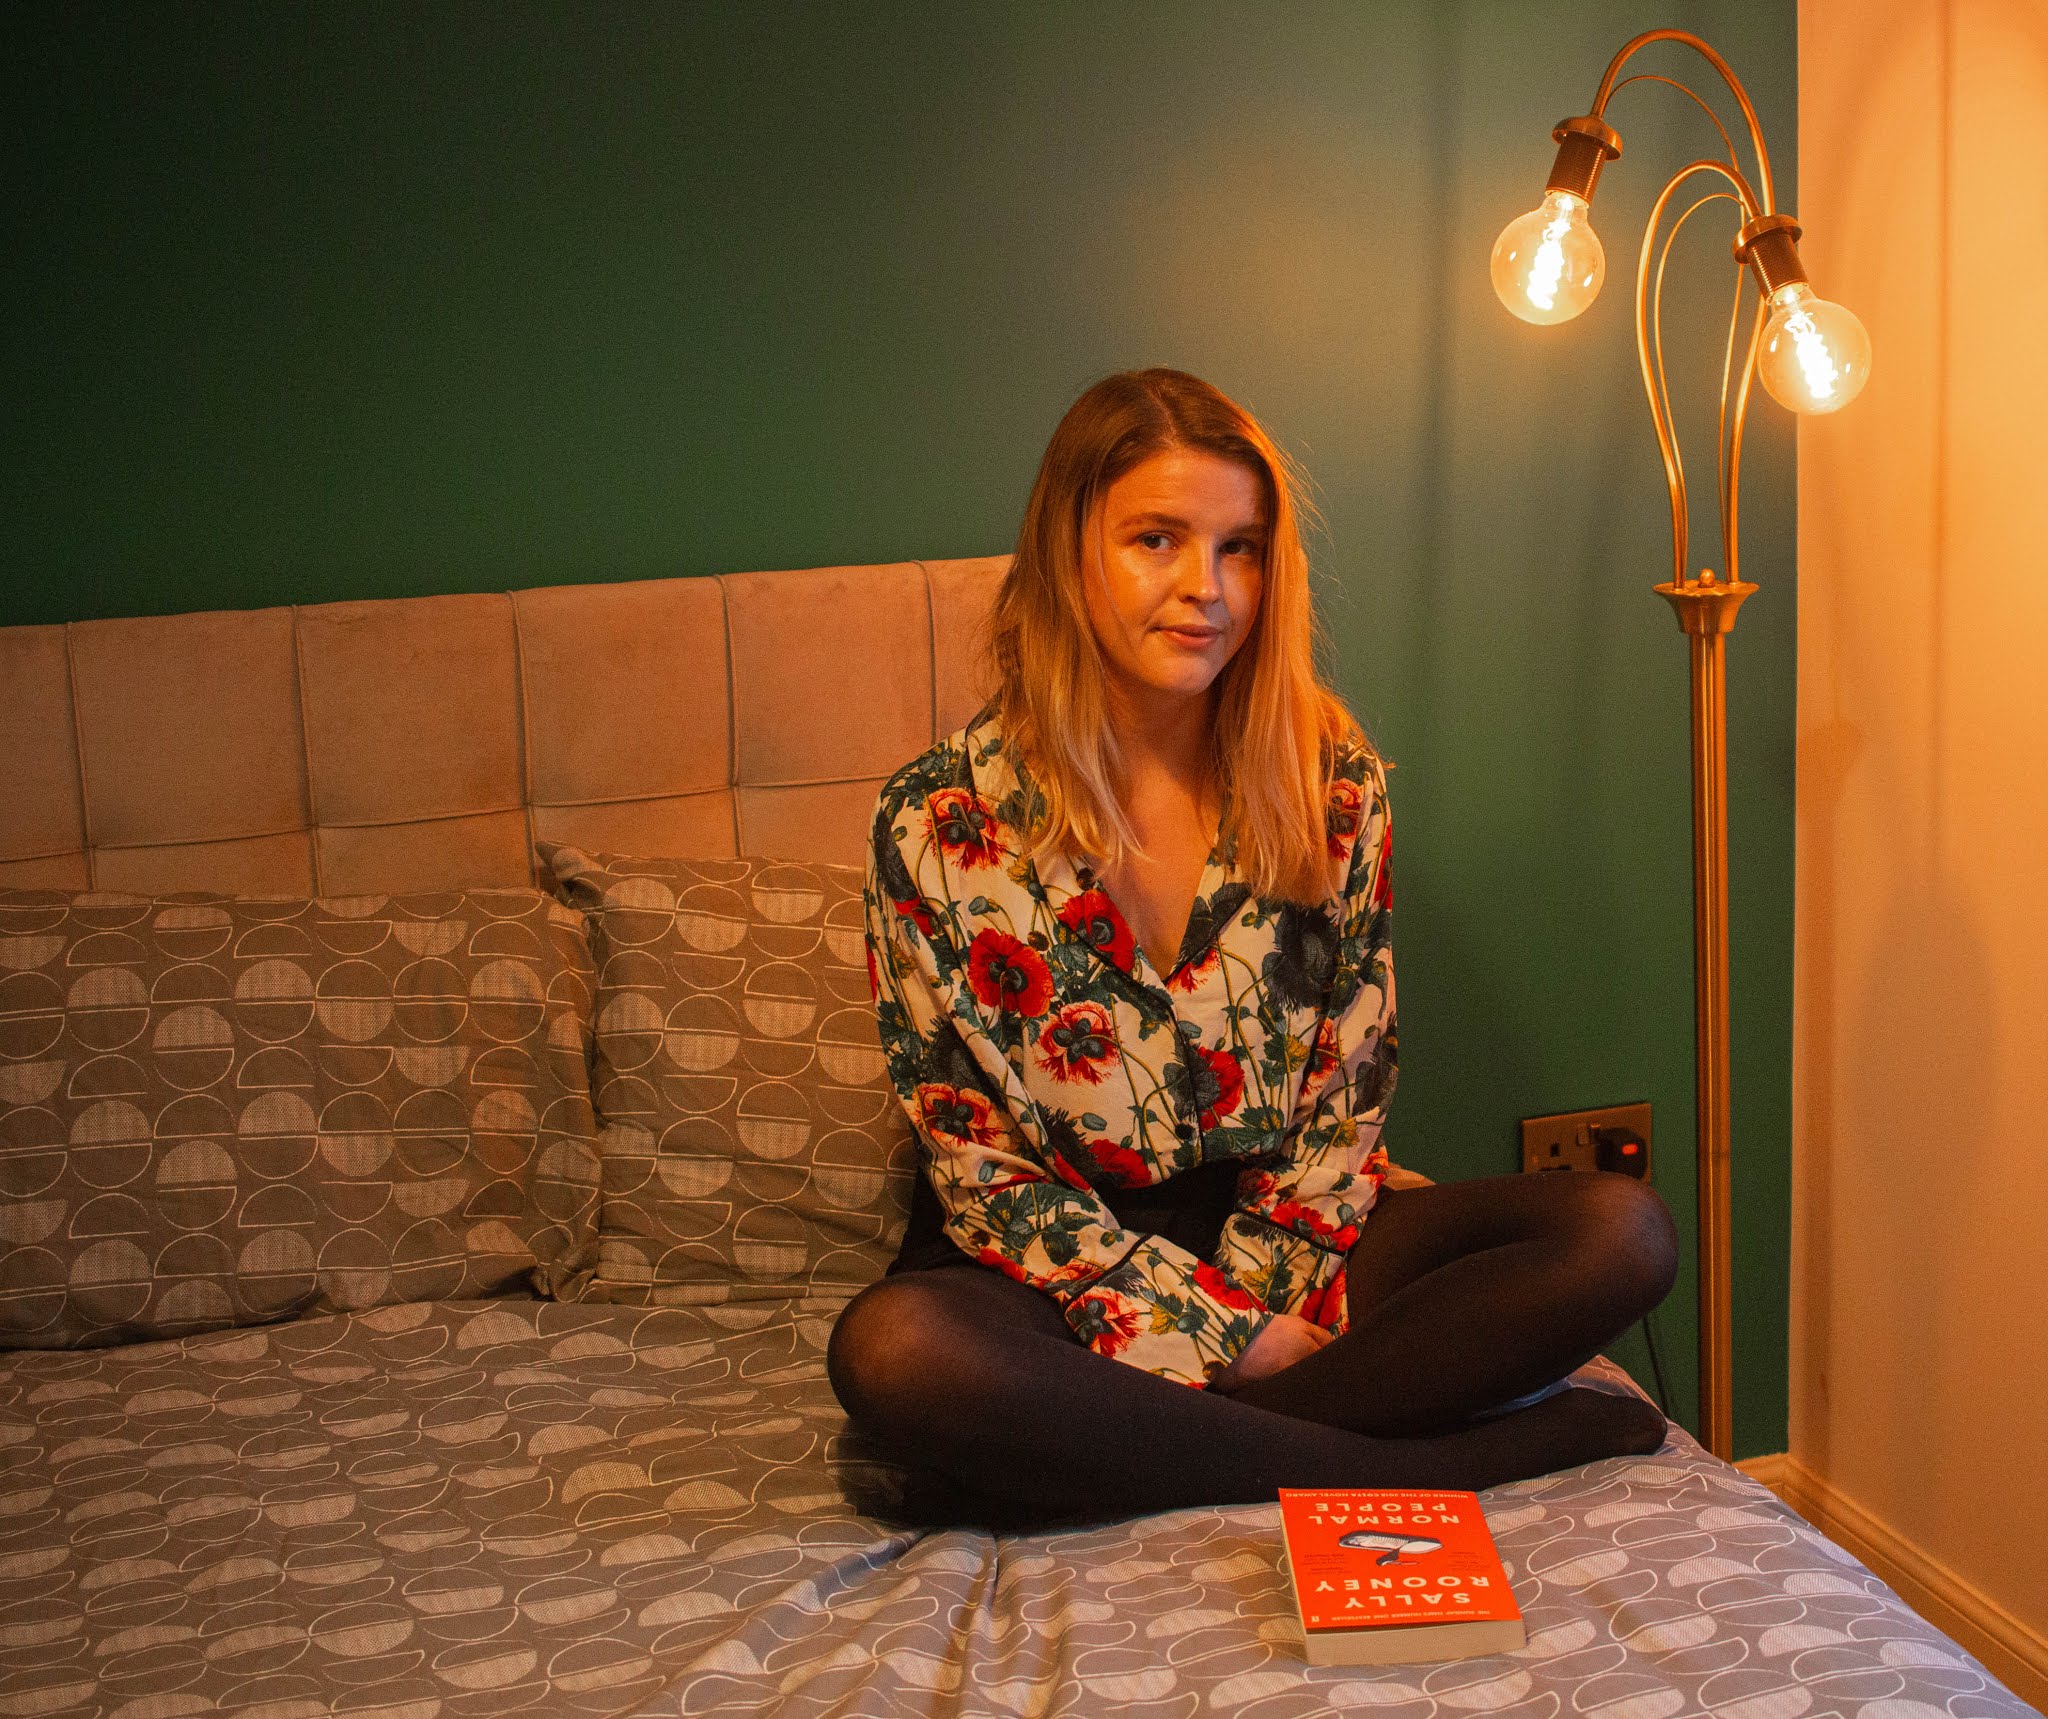 blonde girl chloe harriets sat on bed reading normal people by sally rooney for chloe harriets 2020 book club